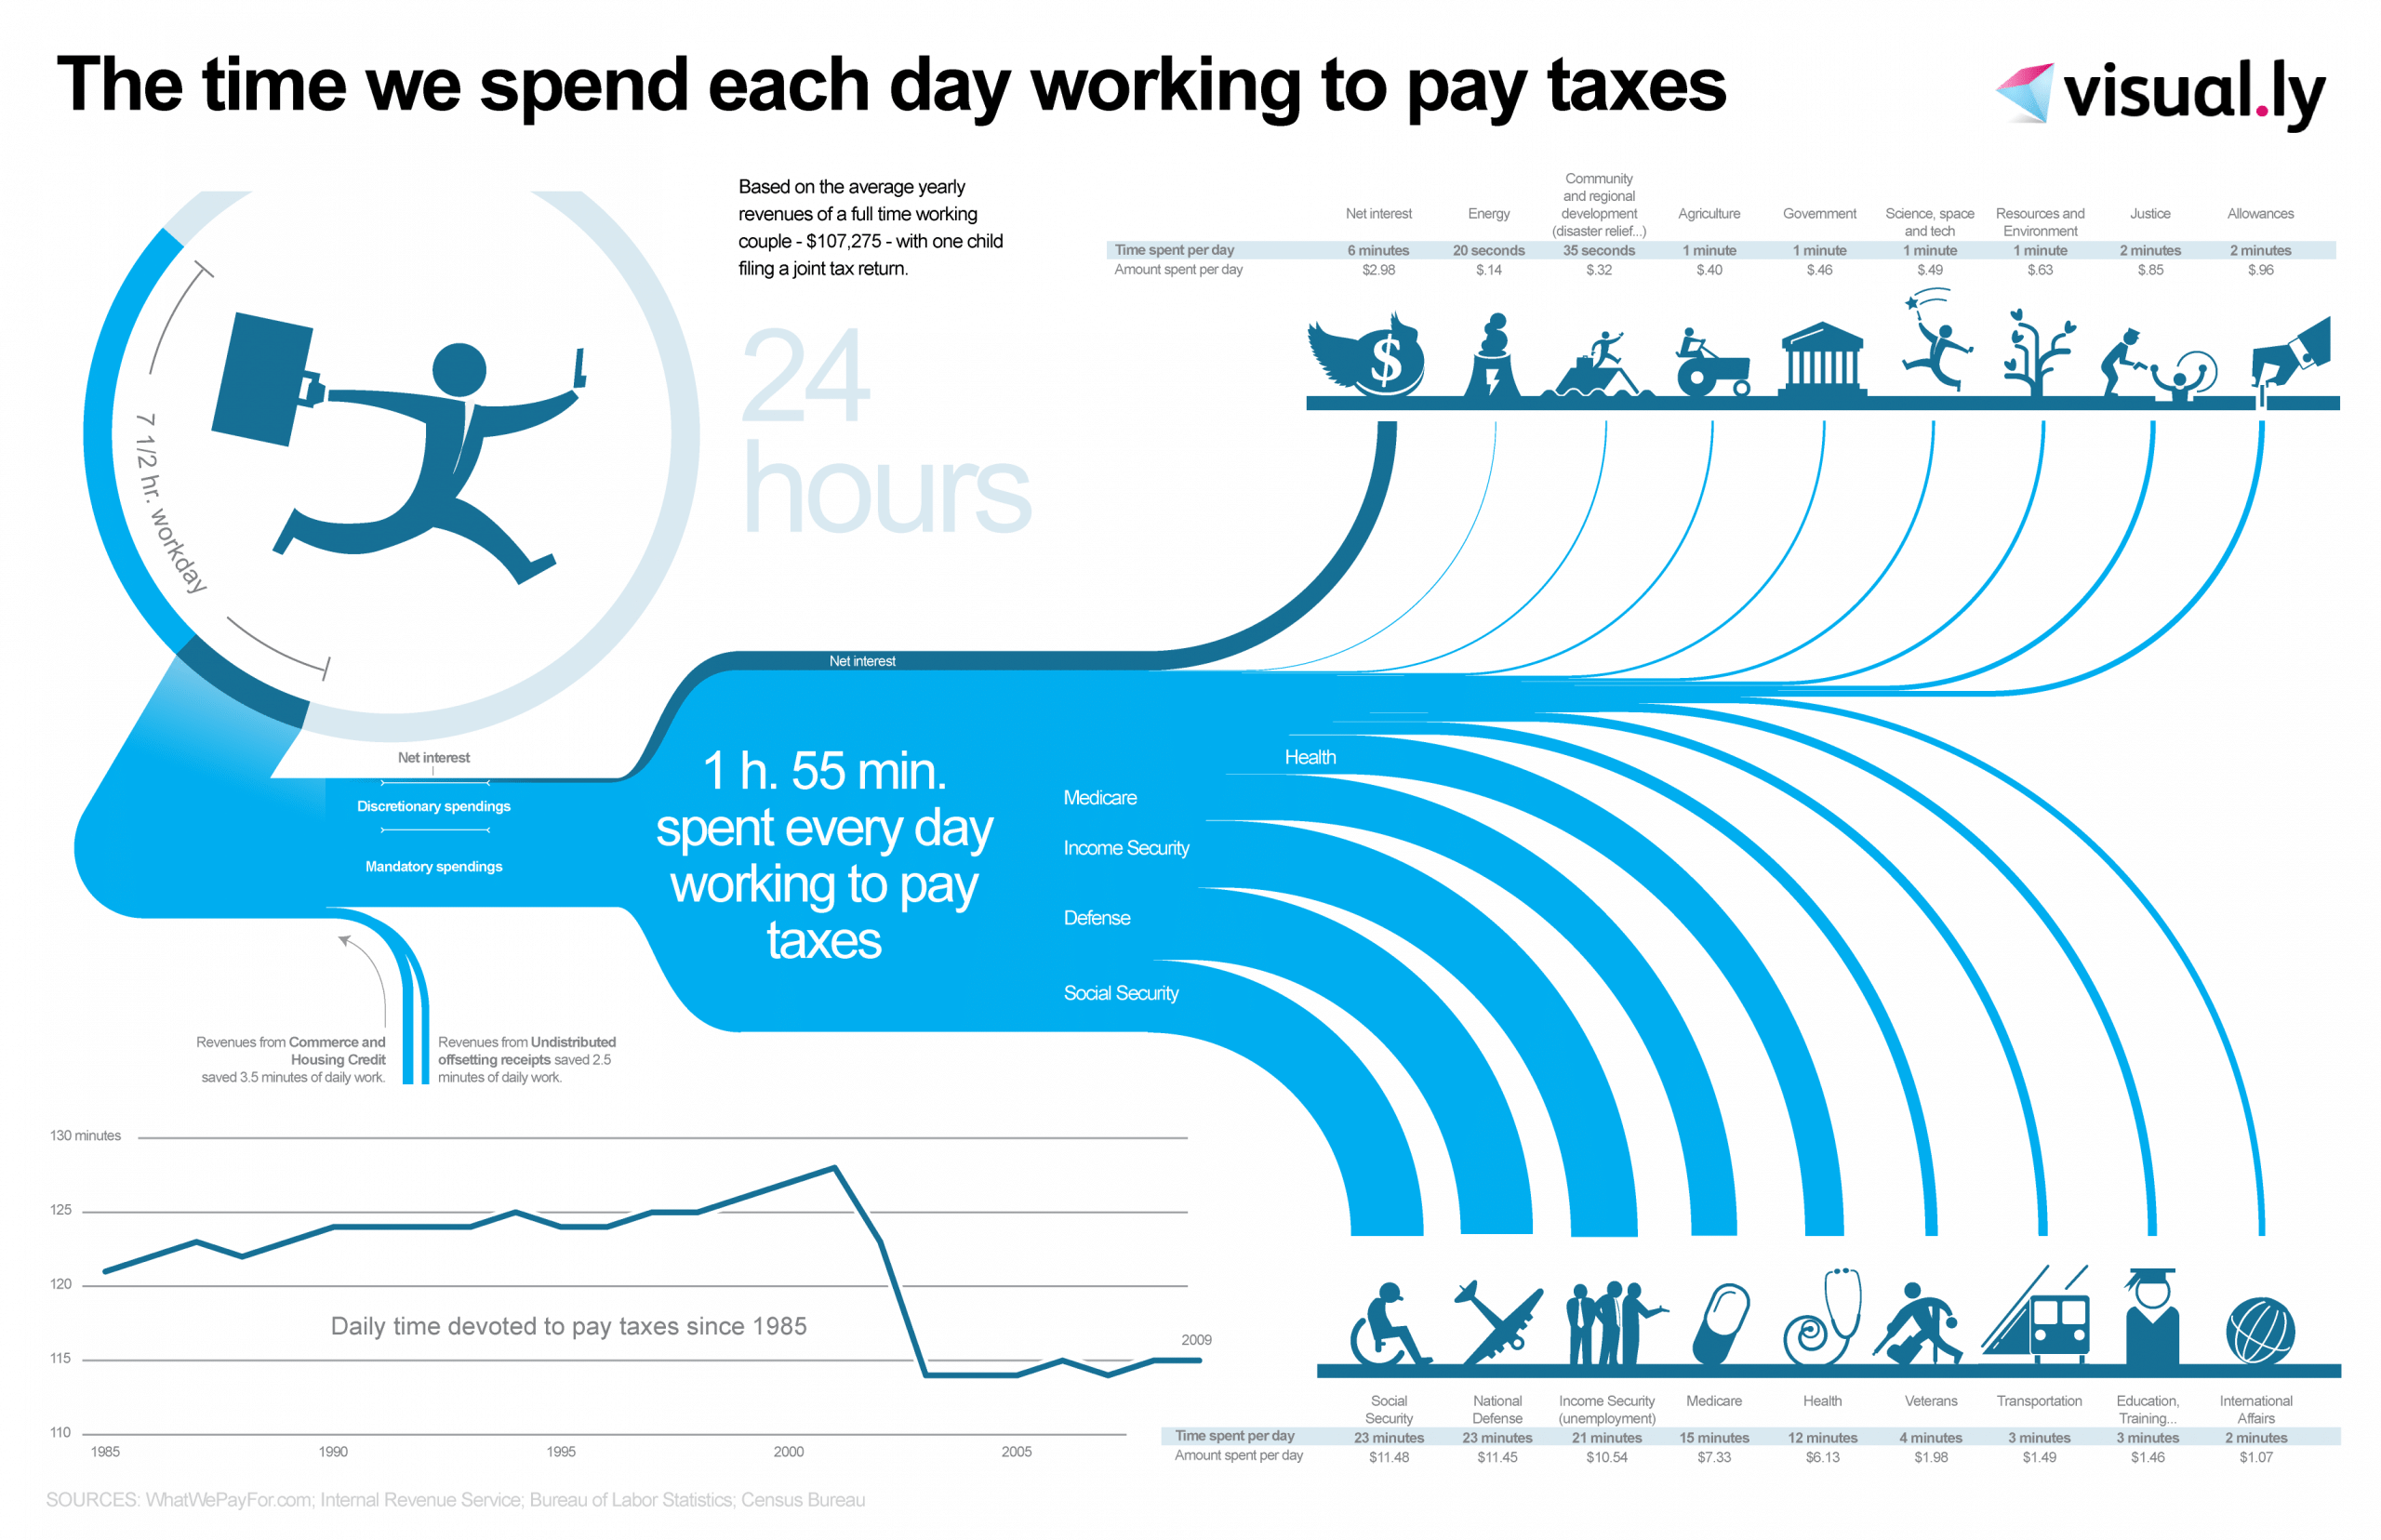 The Work We Do to Pay Taxes